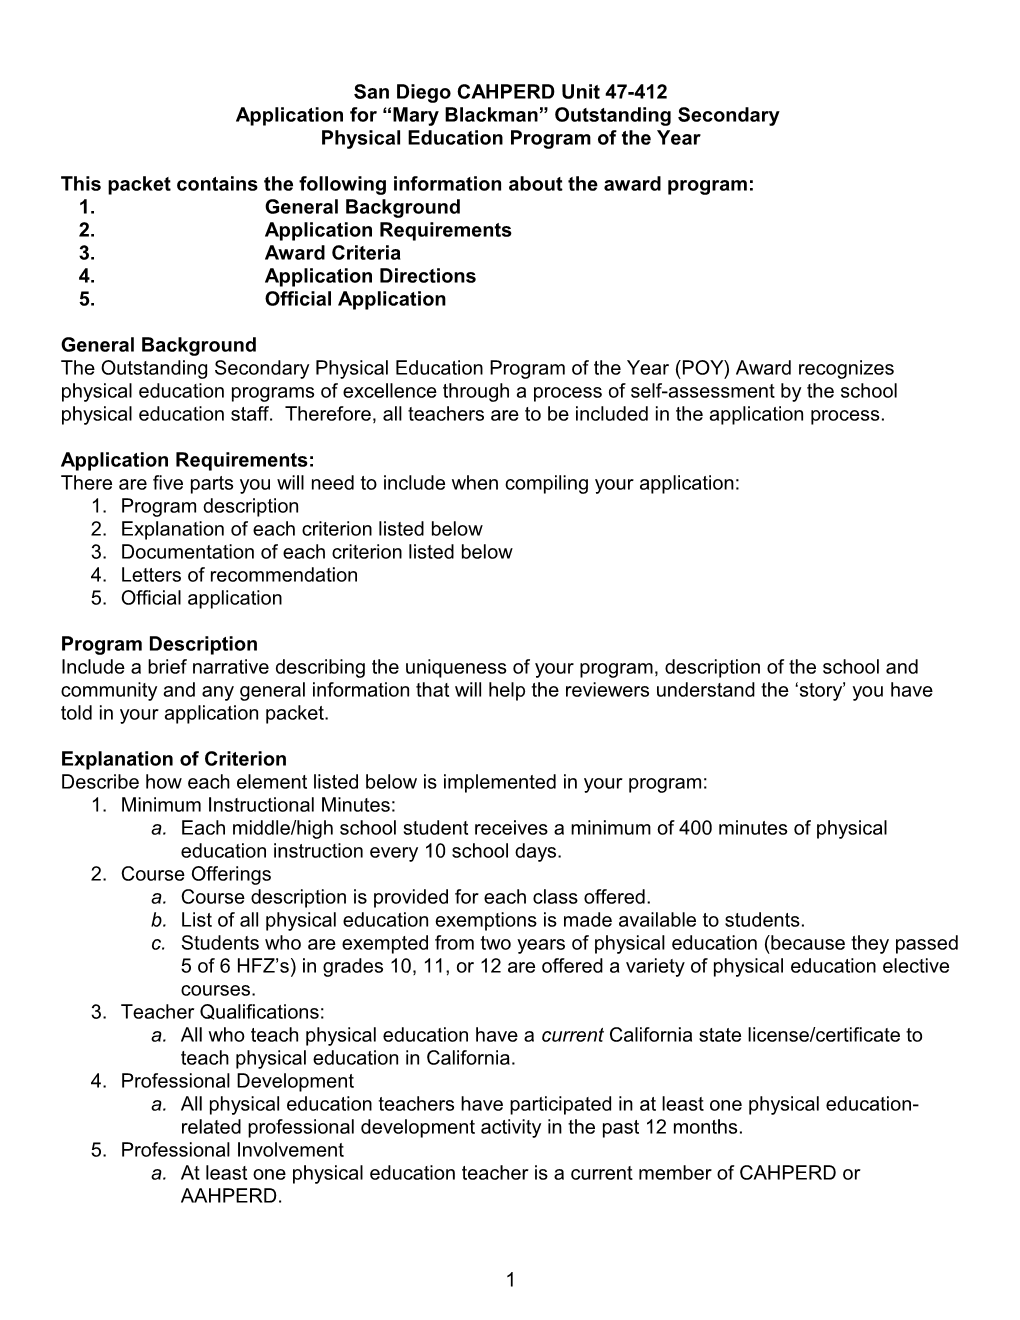 Application Form for 2014 - California Teachers of the Year (CA Dept of Education)